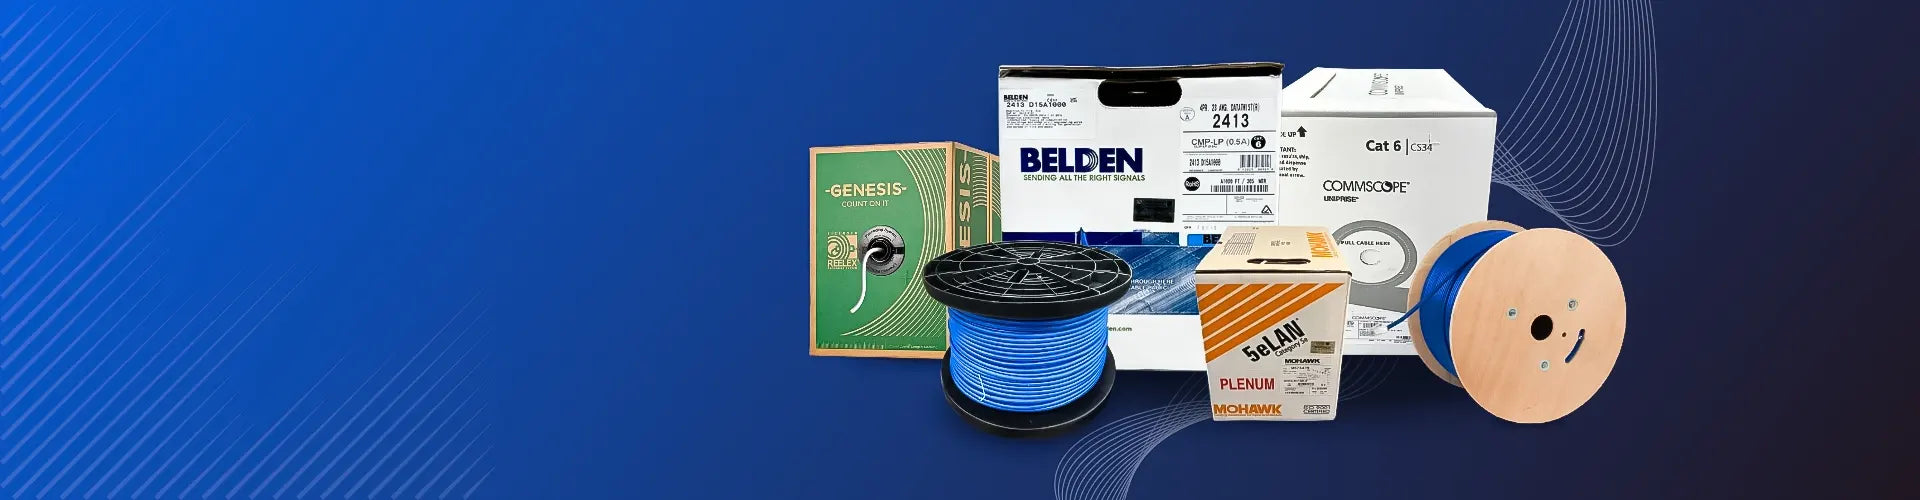 USA Made, Belden, Genesis, CommScope, Mohawk, OCC Ethernet Cables